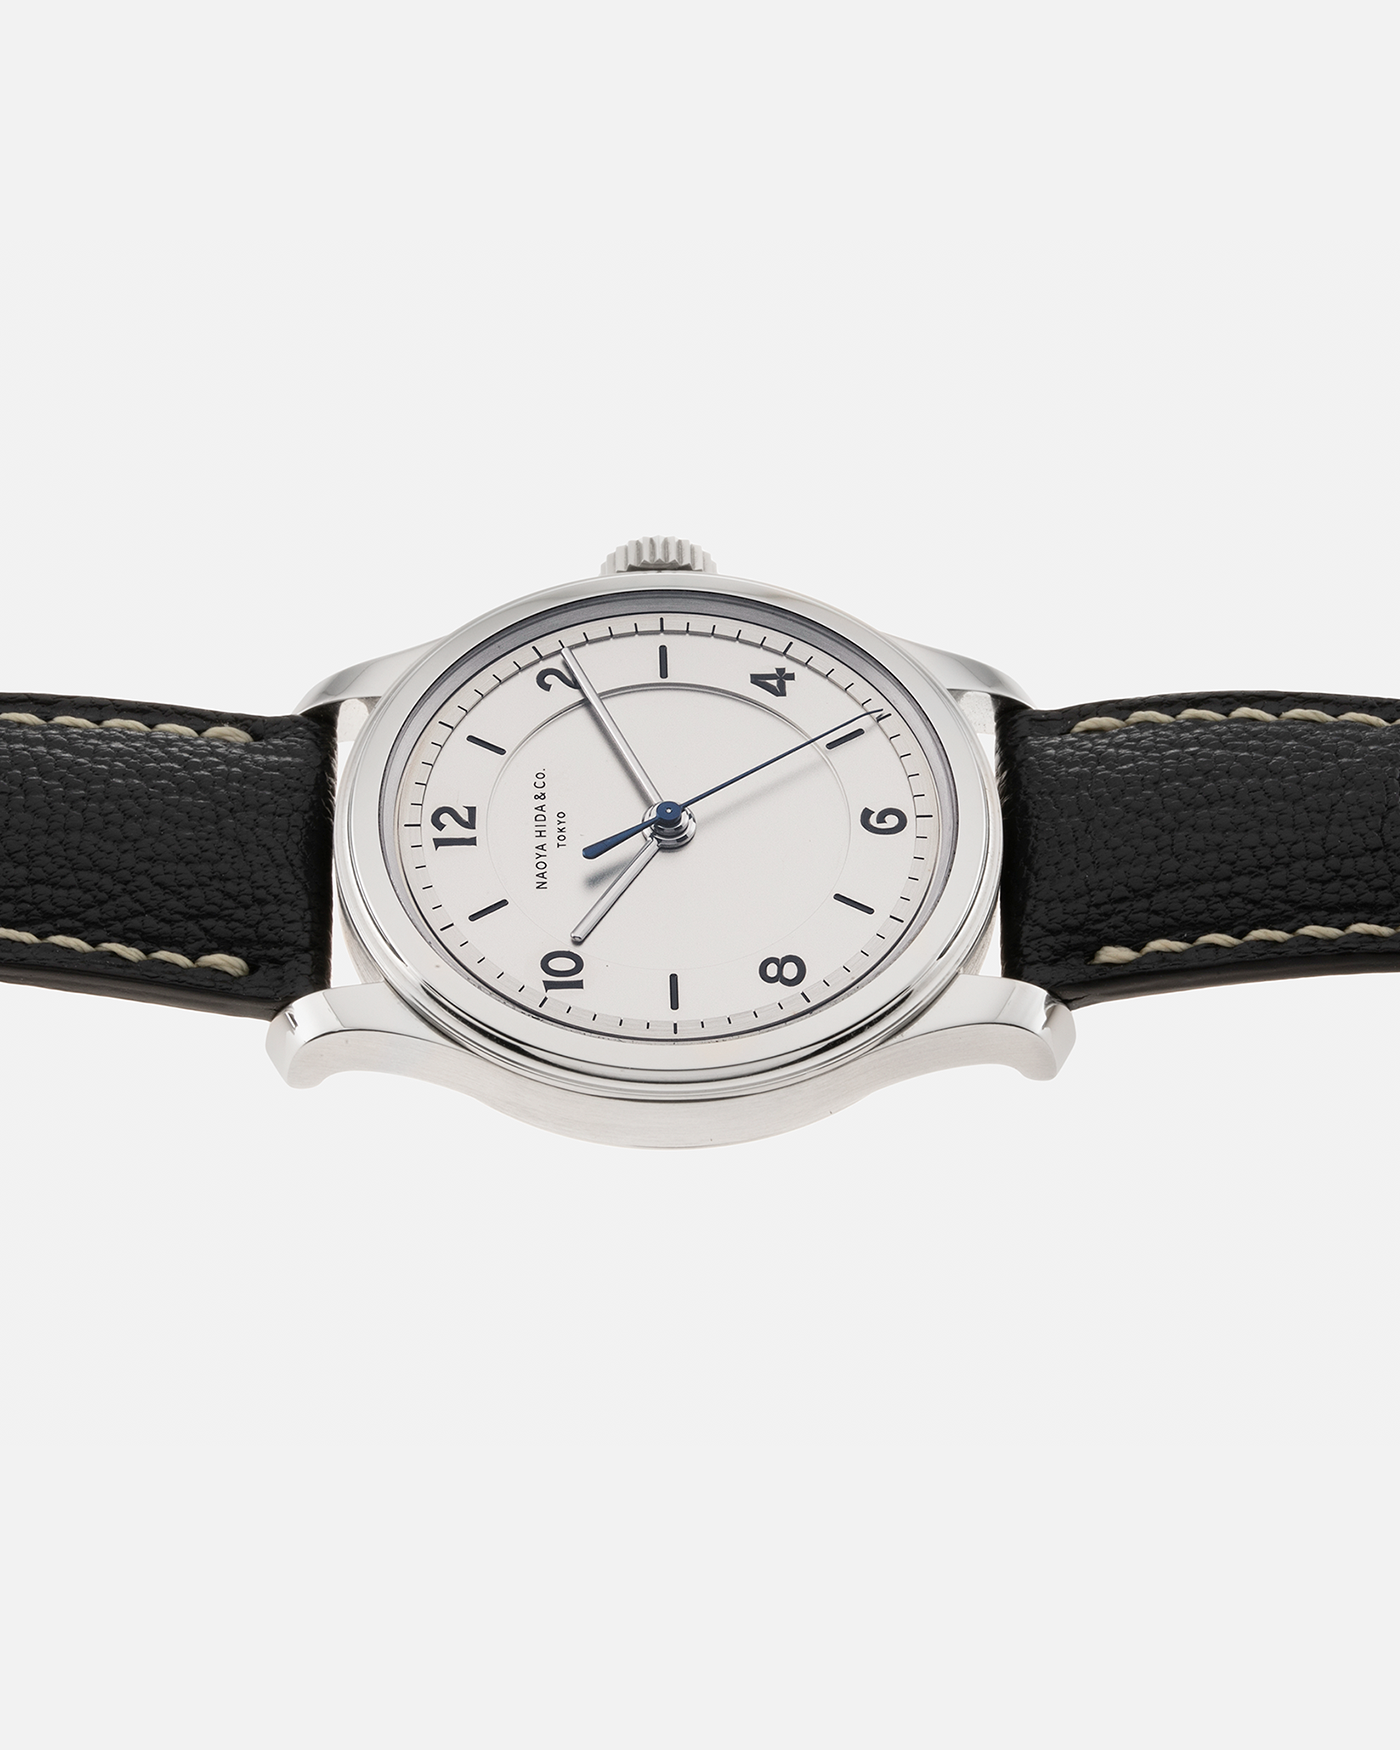 Brand: Naoya Hida Year: 2022 Model: NH Type 2B Material: 904L Stainless Steel Case, German Silver Dial  Movement: Cal. 3020CS, Manual-Winding Case Diameter: 37mm Strap: Naoya Hida (Jean Rousseau) Navy Blue Leather Strap with Contrasting Stitching and Signed Stainless Steel Tang Buckle